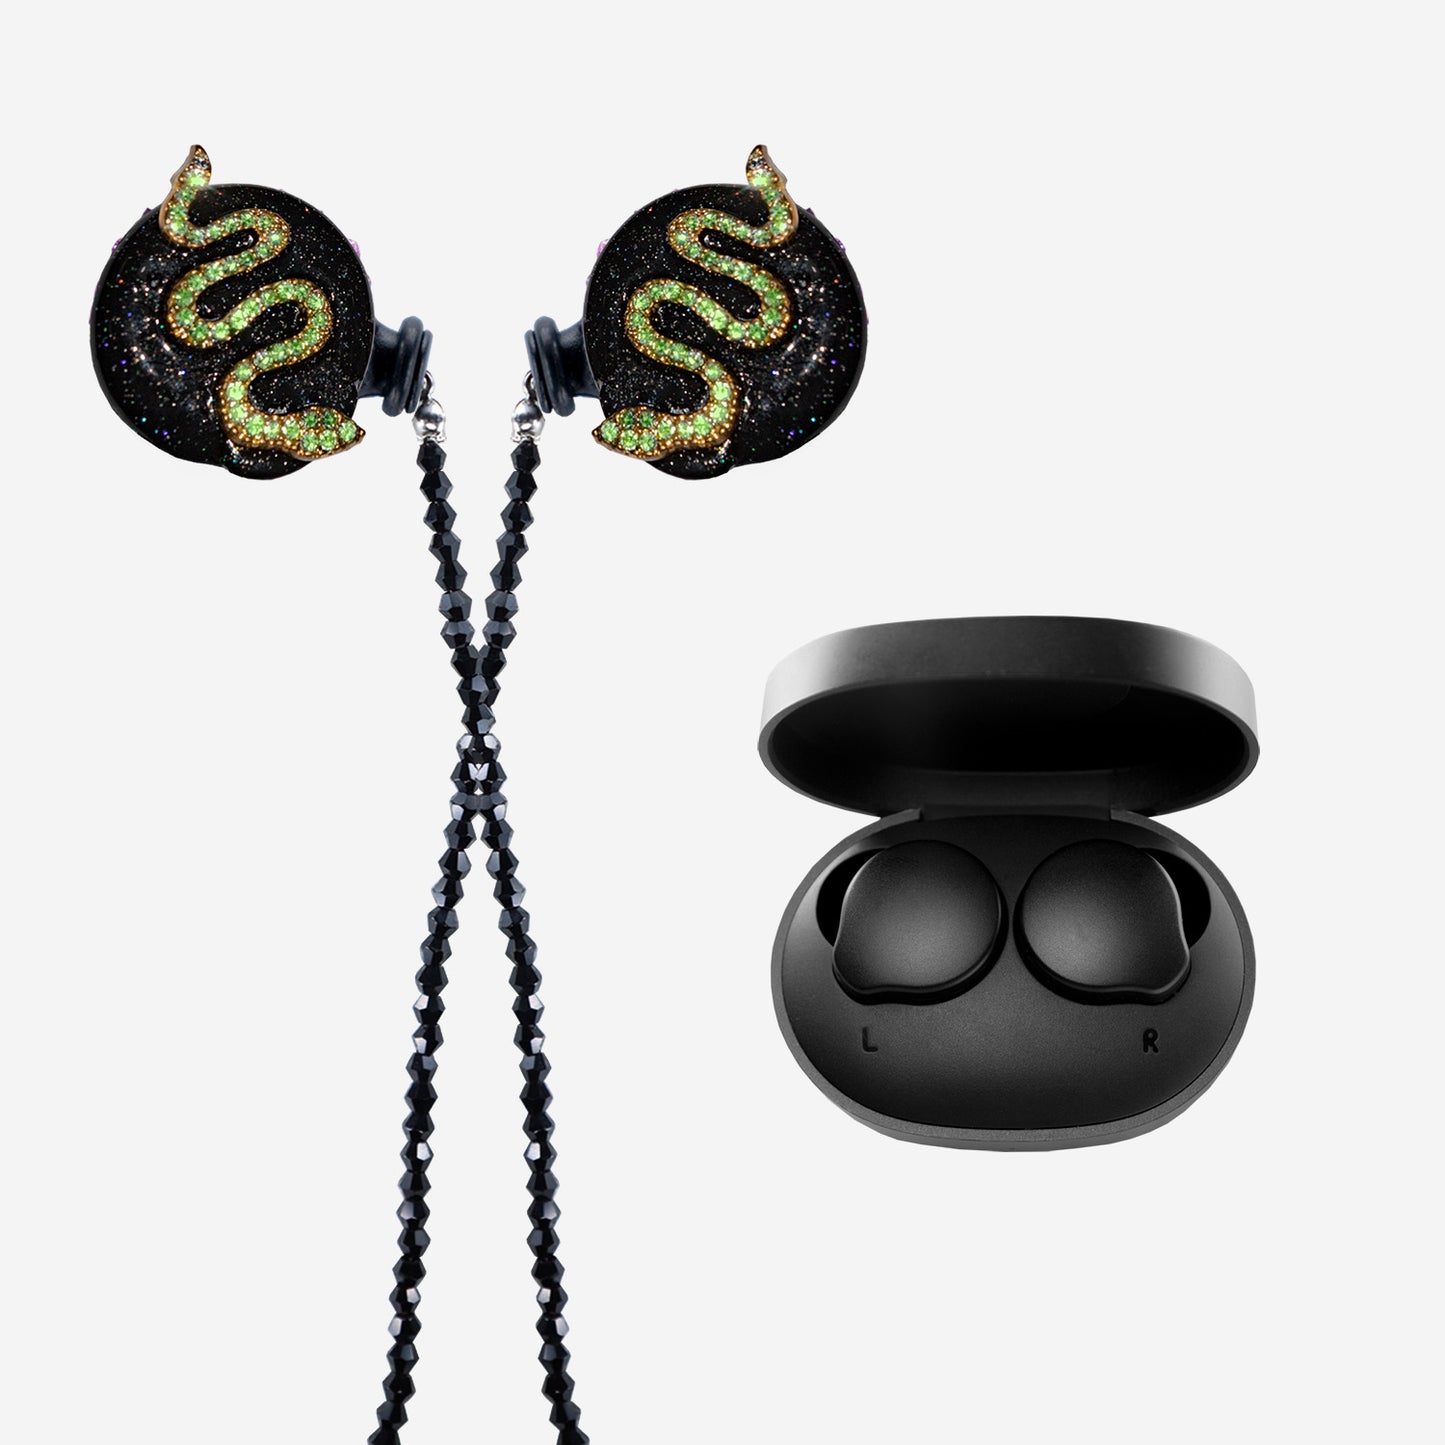 The Cleo Earbud Drop